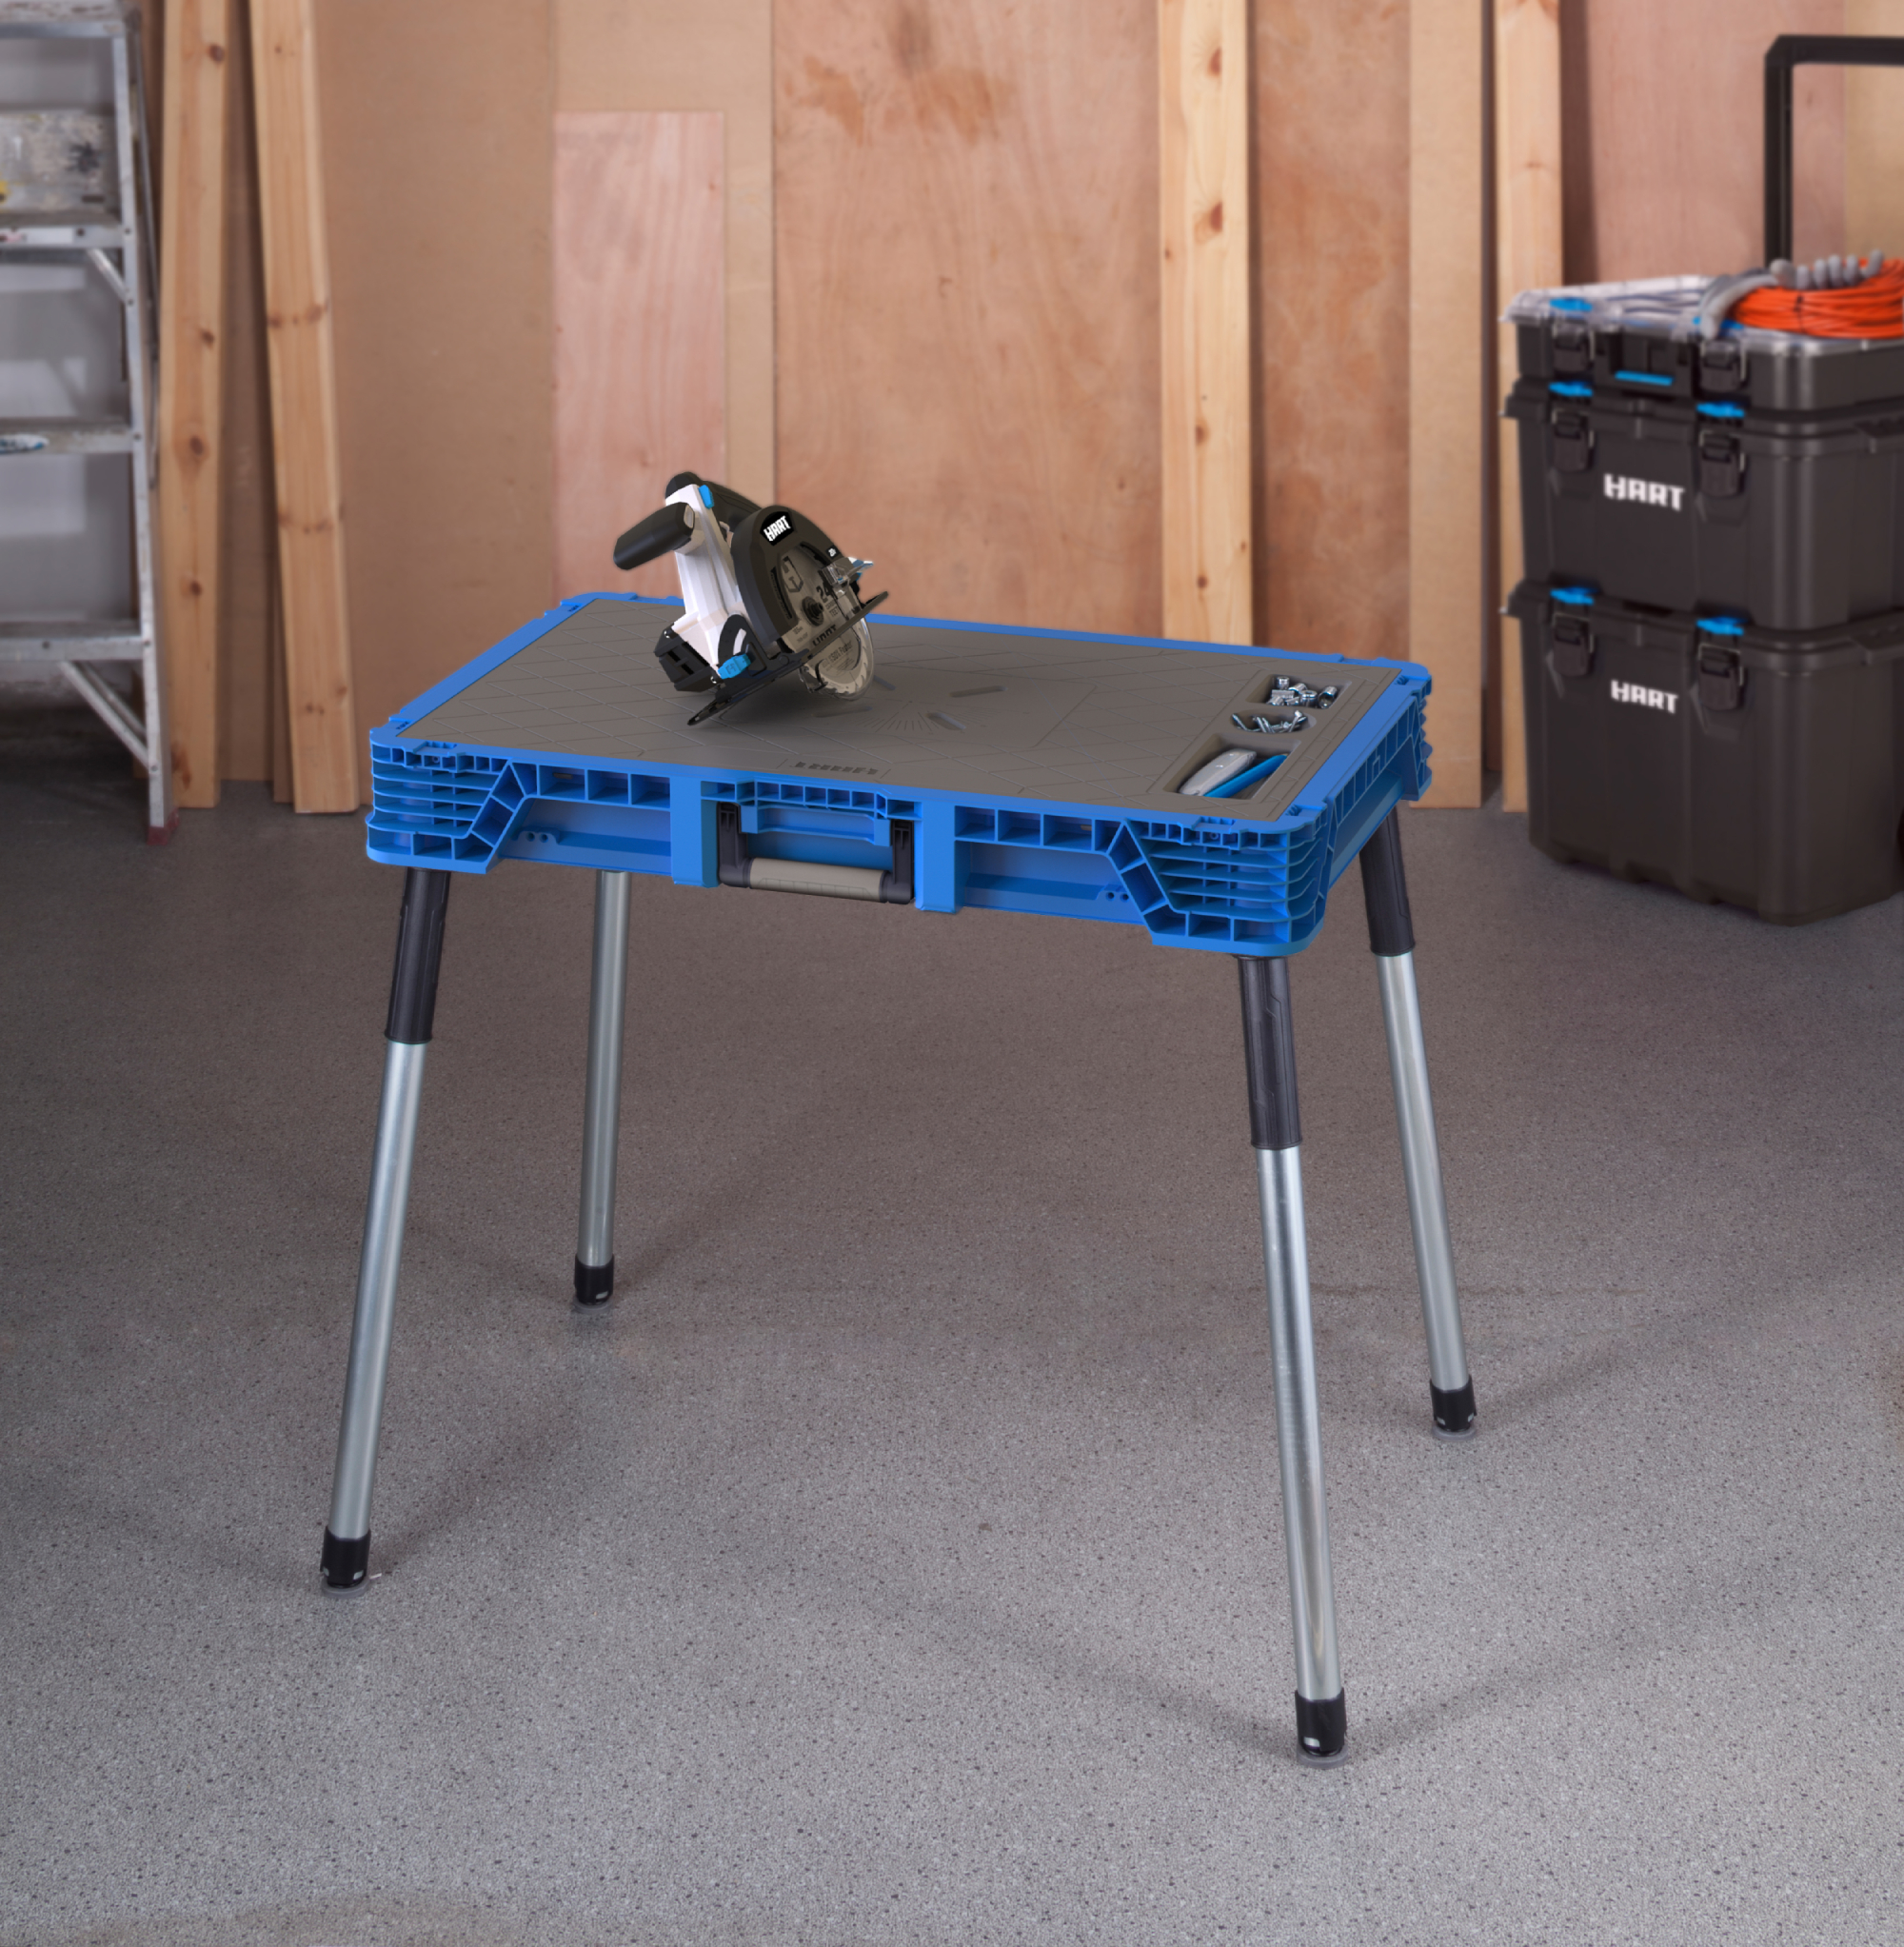 HART Portable Heavy Duty Plastic Workbench with Parts Organizer - image 2 of 3